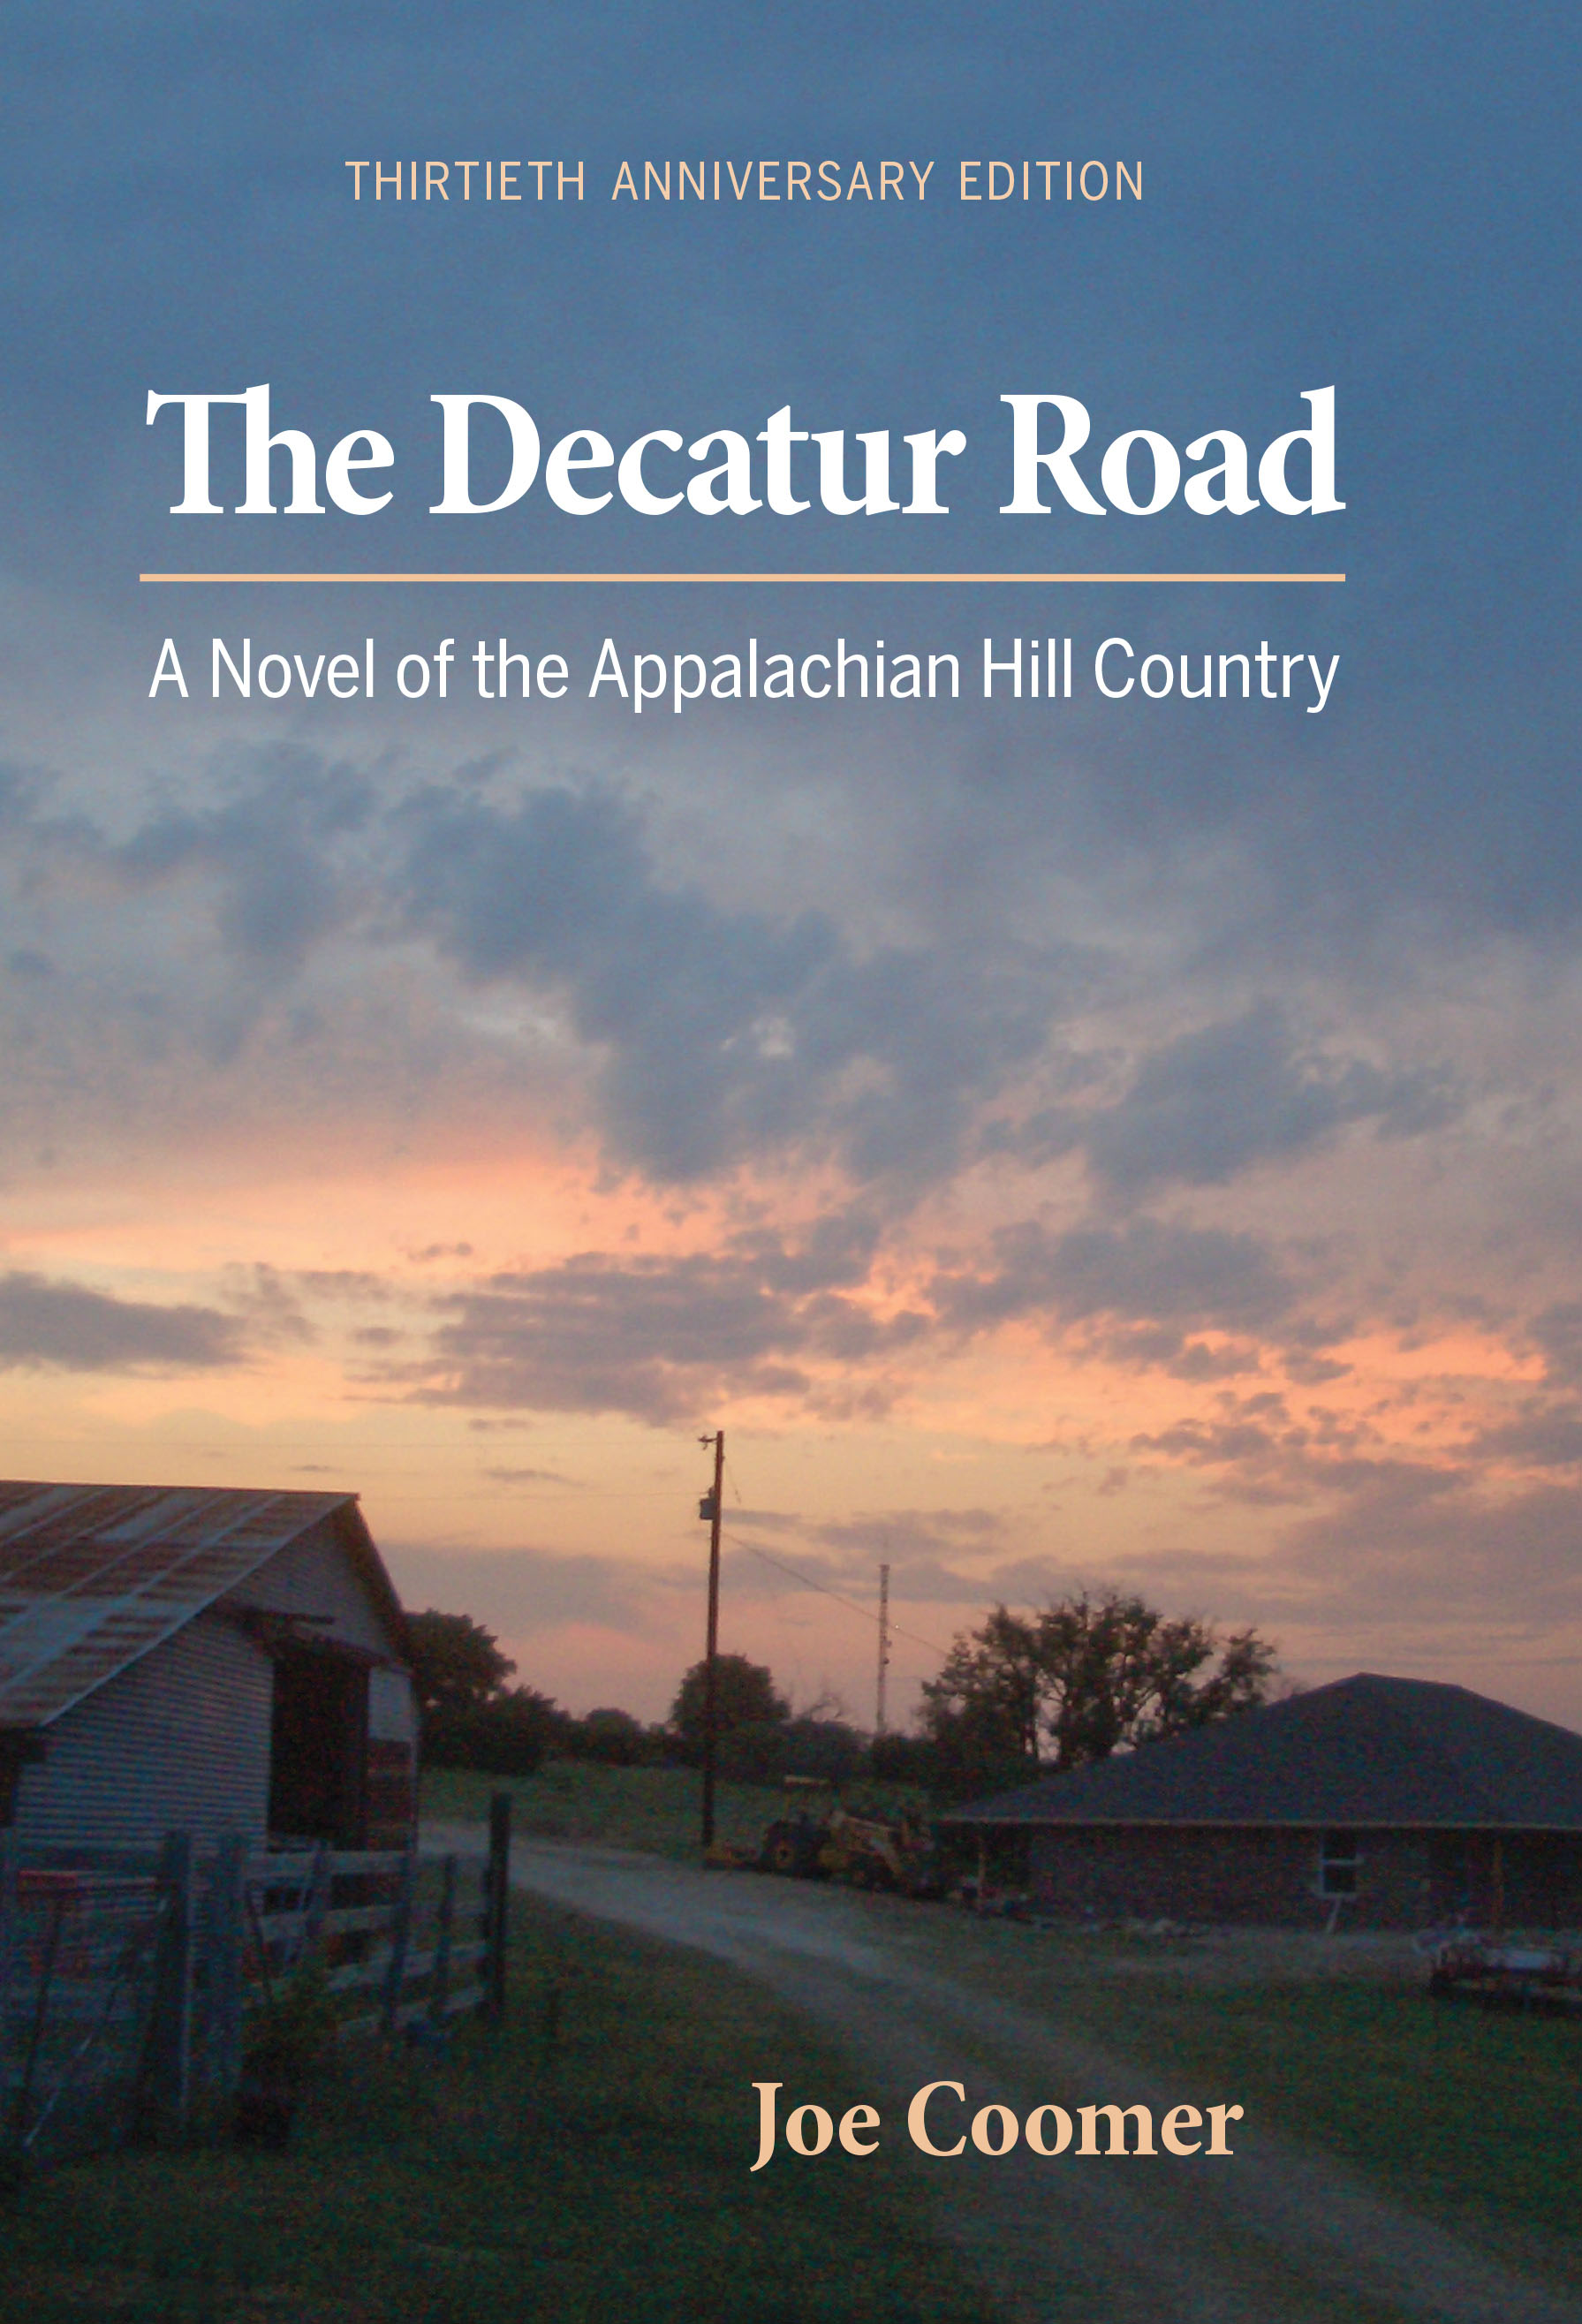 The Decatur Road: A Novel of the Appalachian Hill Country by Joe Coomer